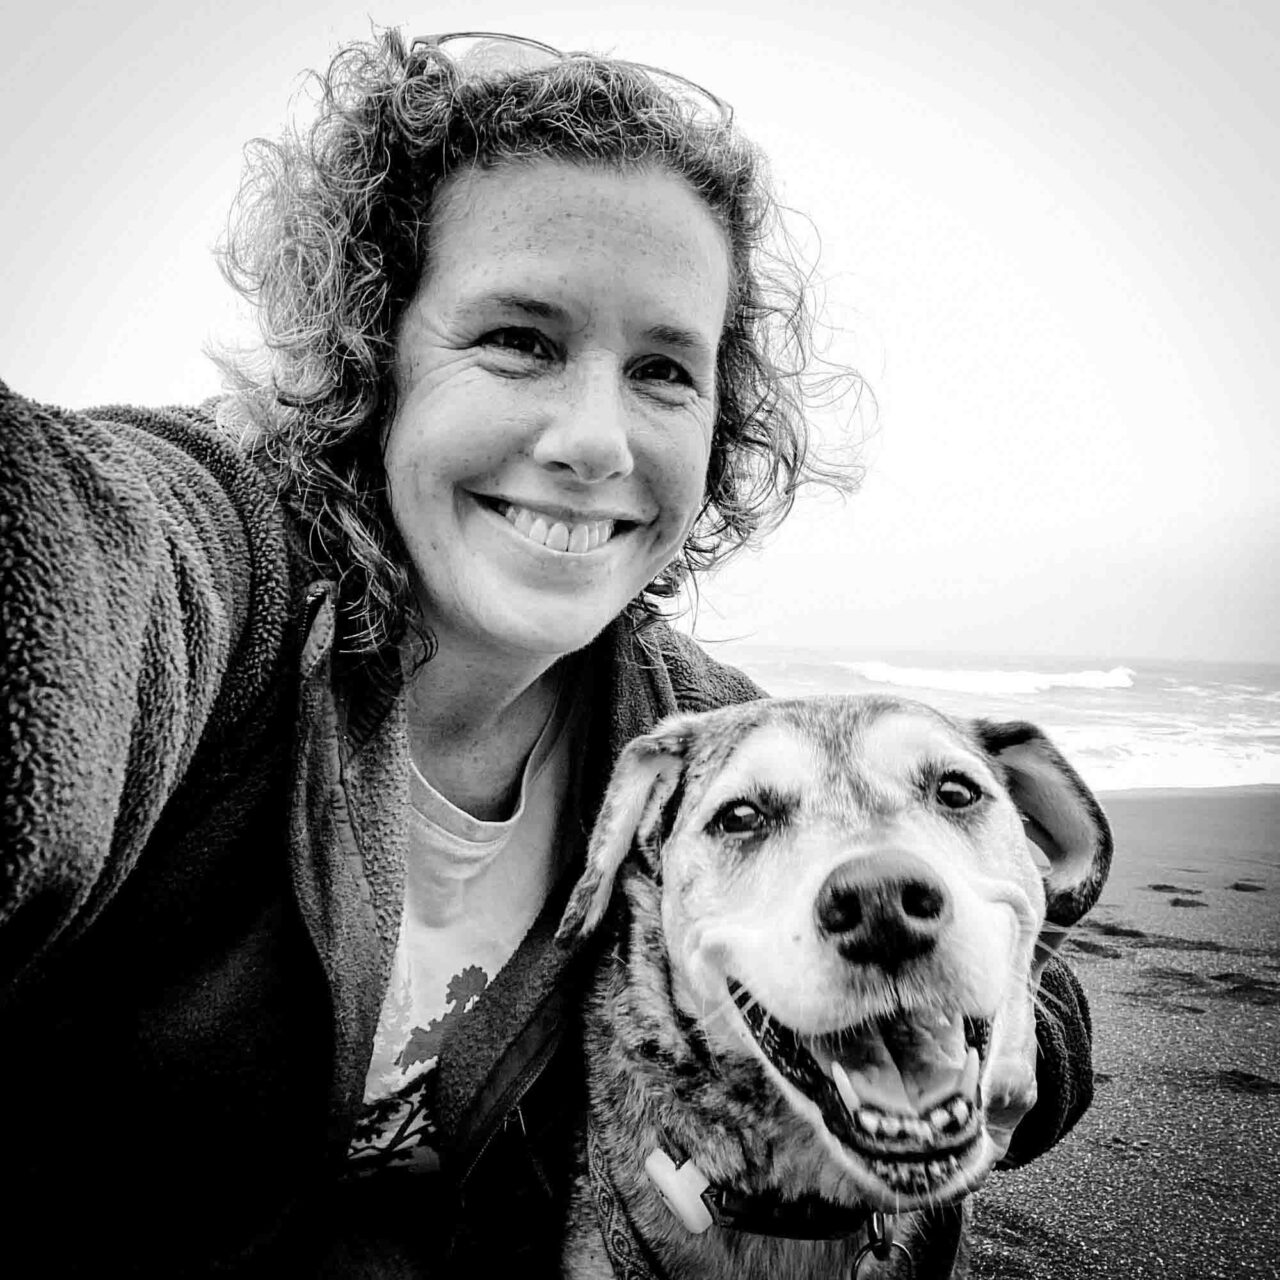 My dog and me on the beach in Pacifica, California